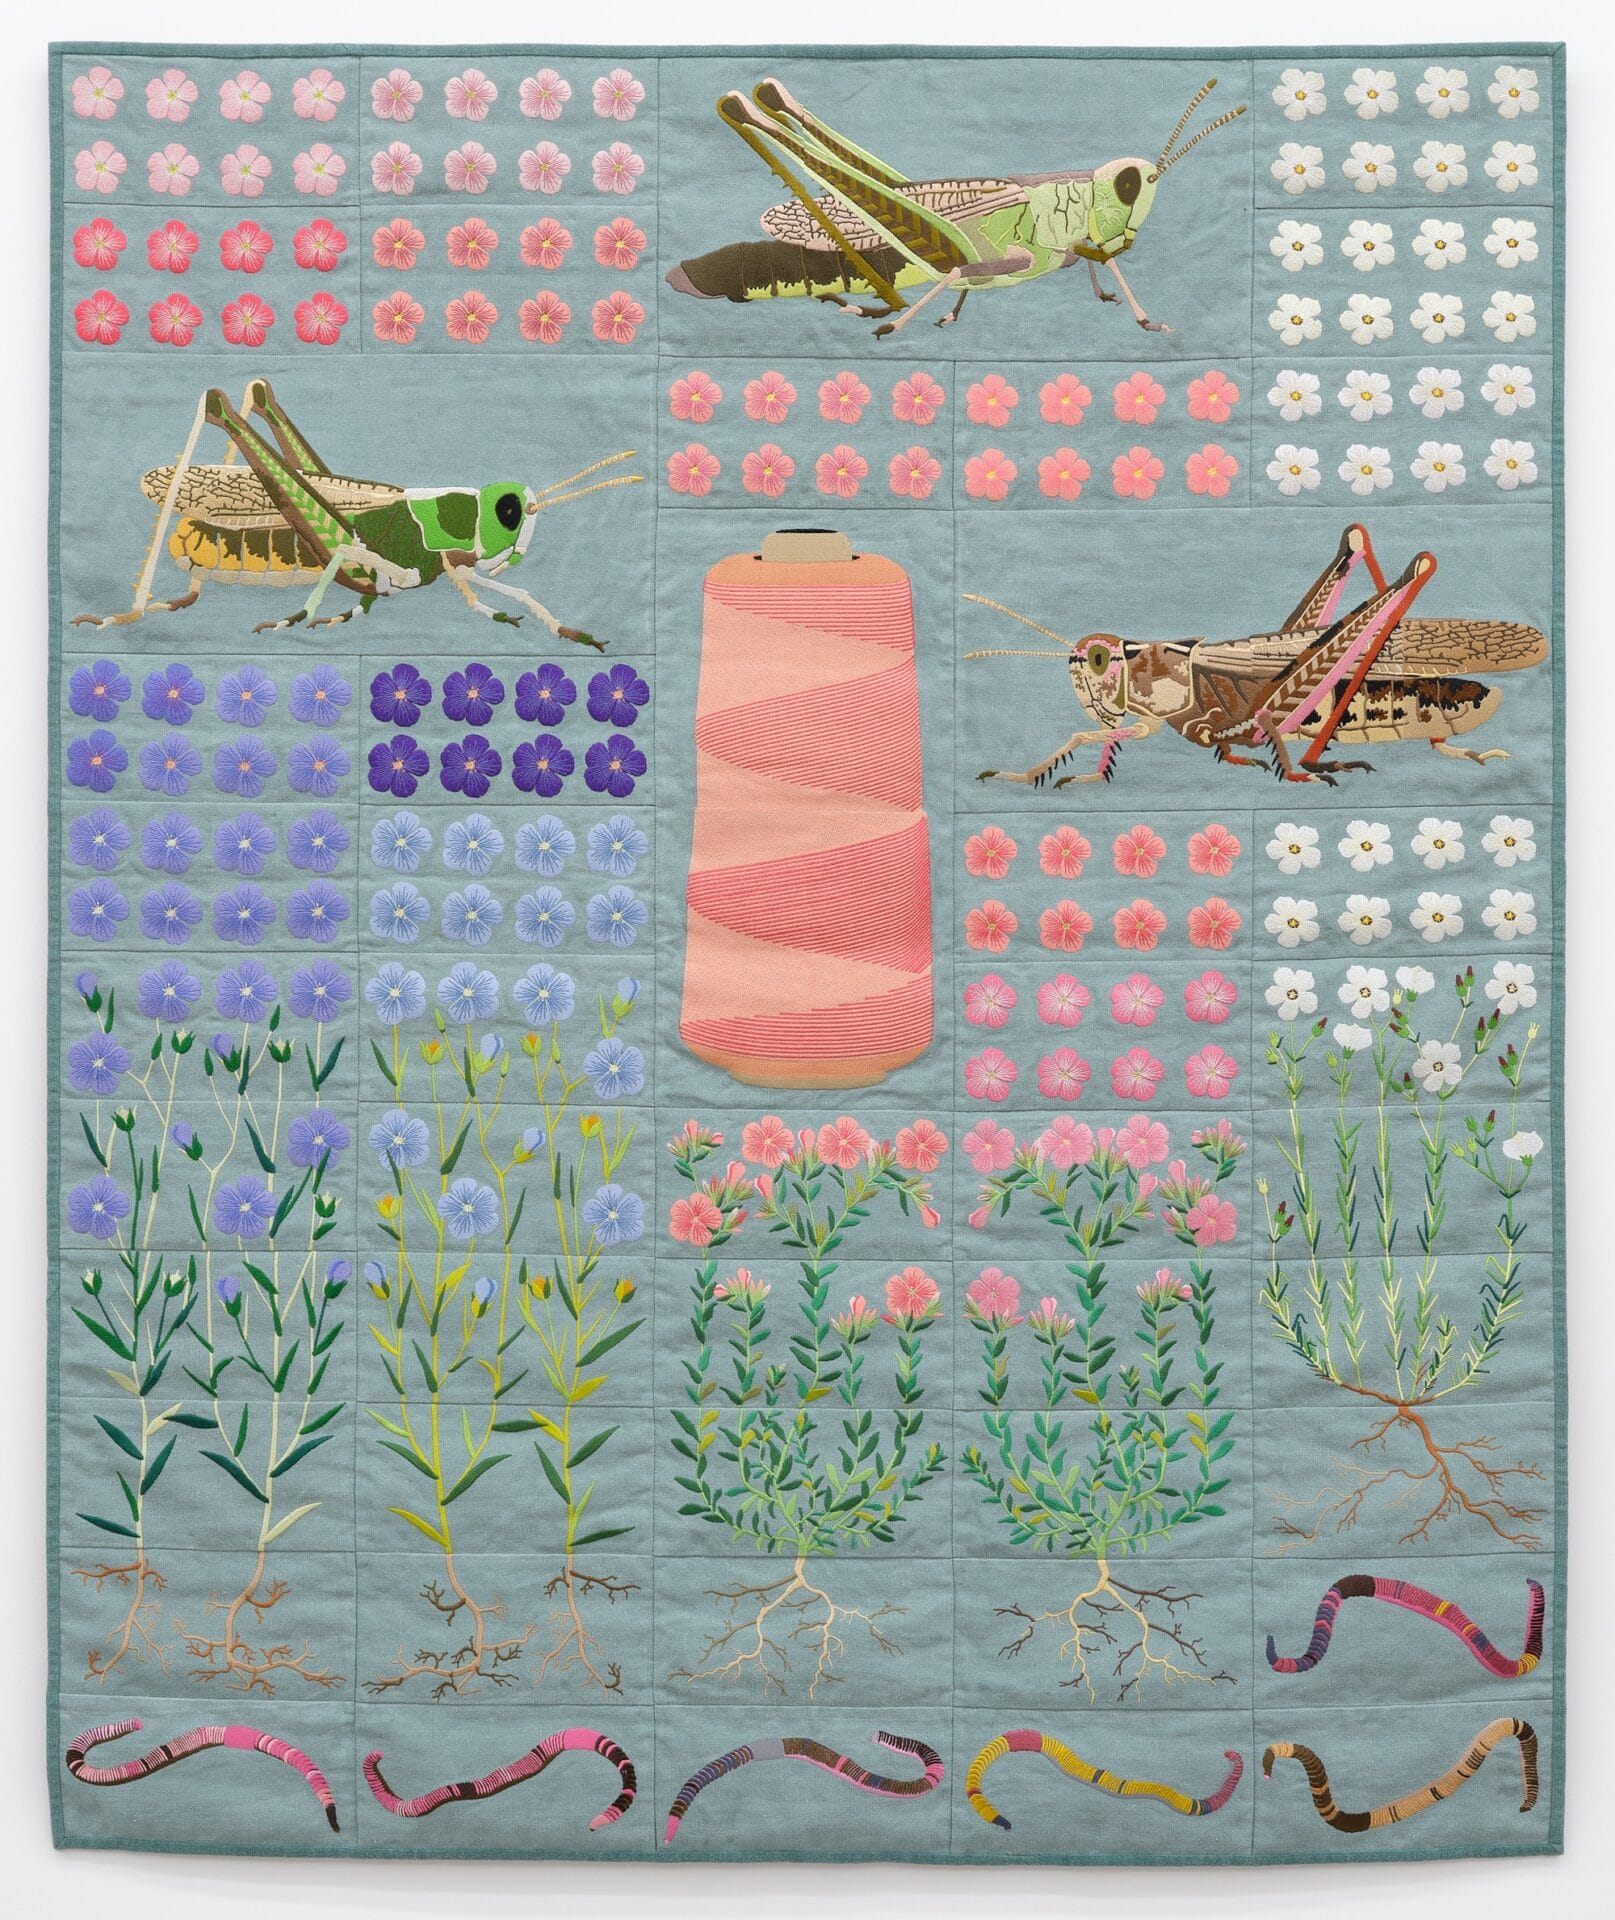 a quilt with patterns of flowers, grasshoppers, plants, a spool of thread, and worms on a light blue background